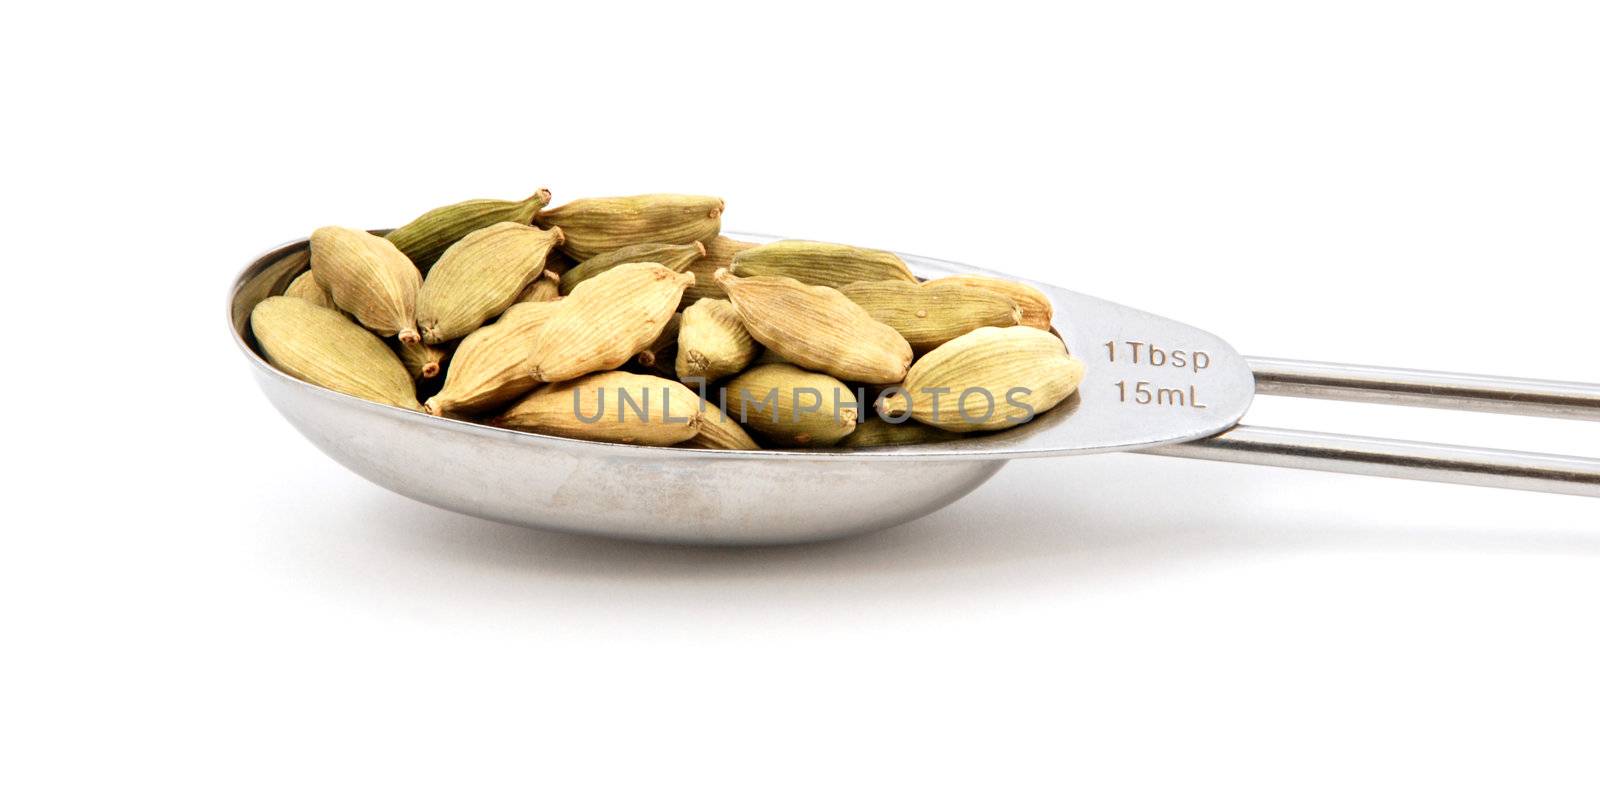 Cardamom pods measured in a metal tablespoon, isolated on a white background